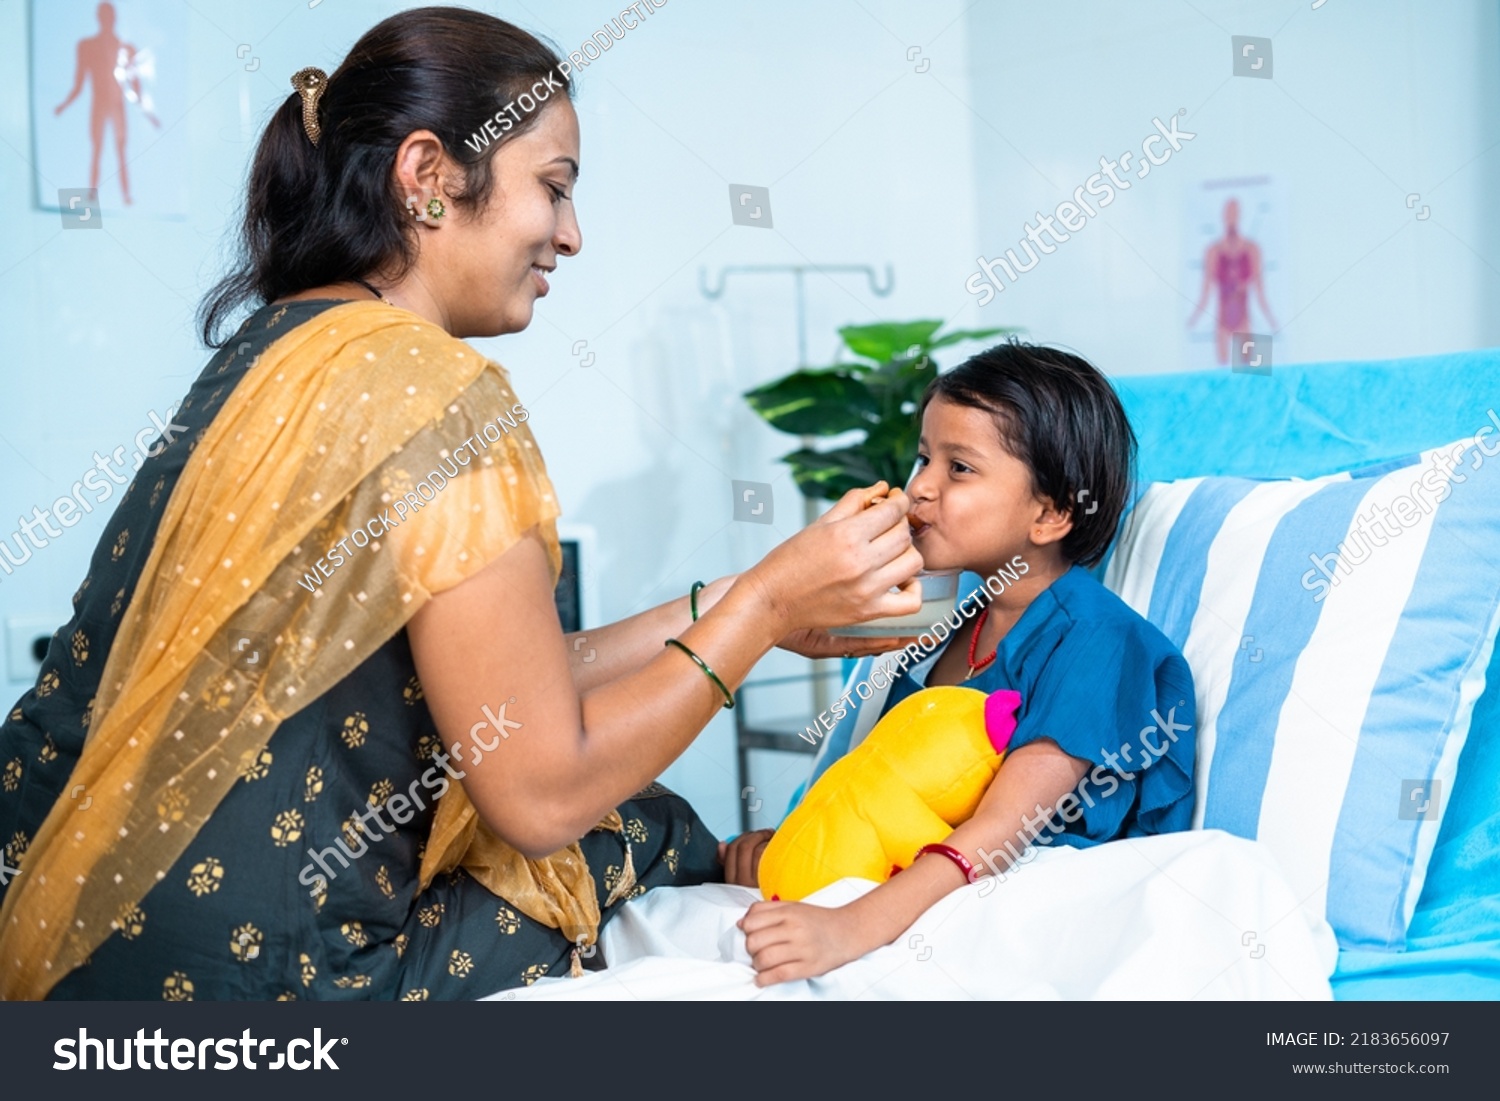 Mother feeding porridge to ill kid while admitted at hospital ward - concept of parental caring, medical treatment and health care. #2183656097